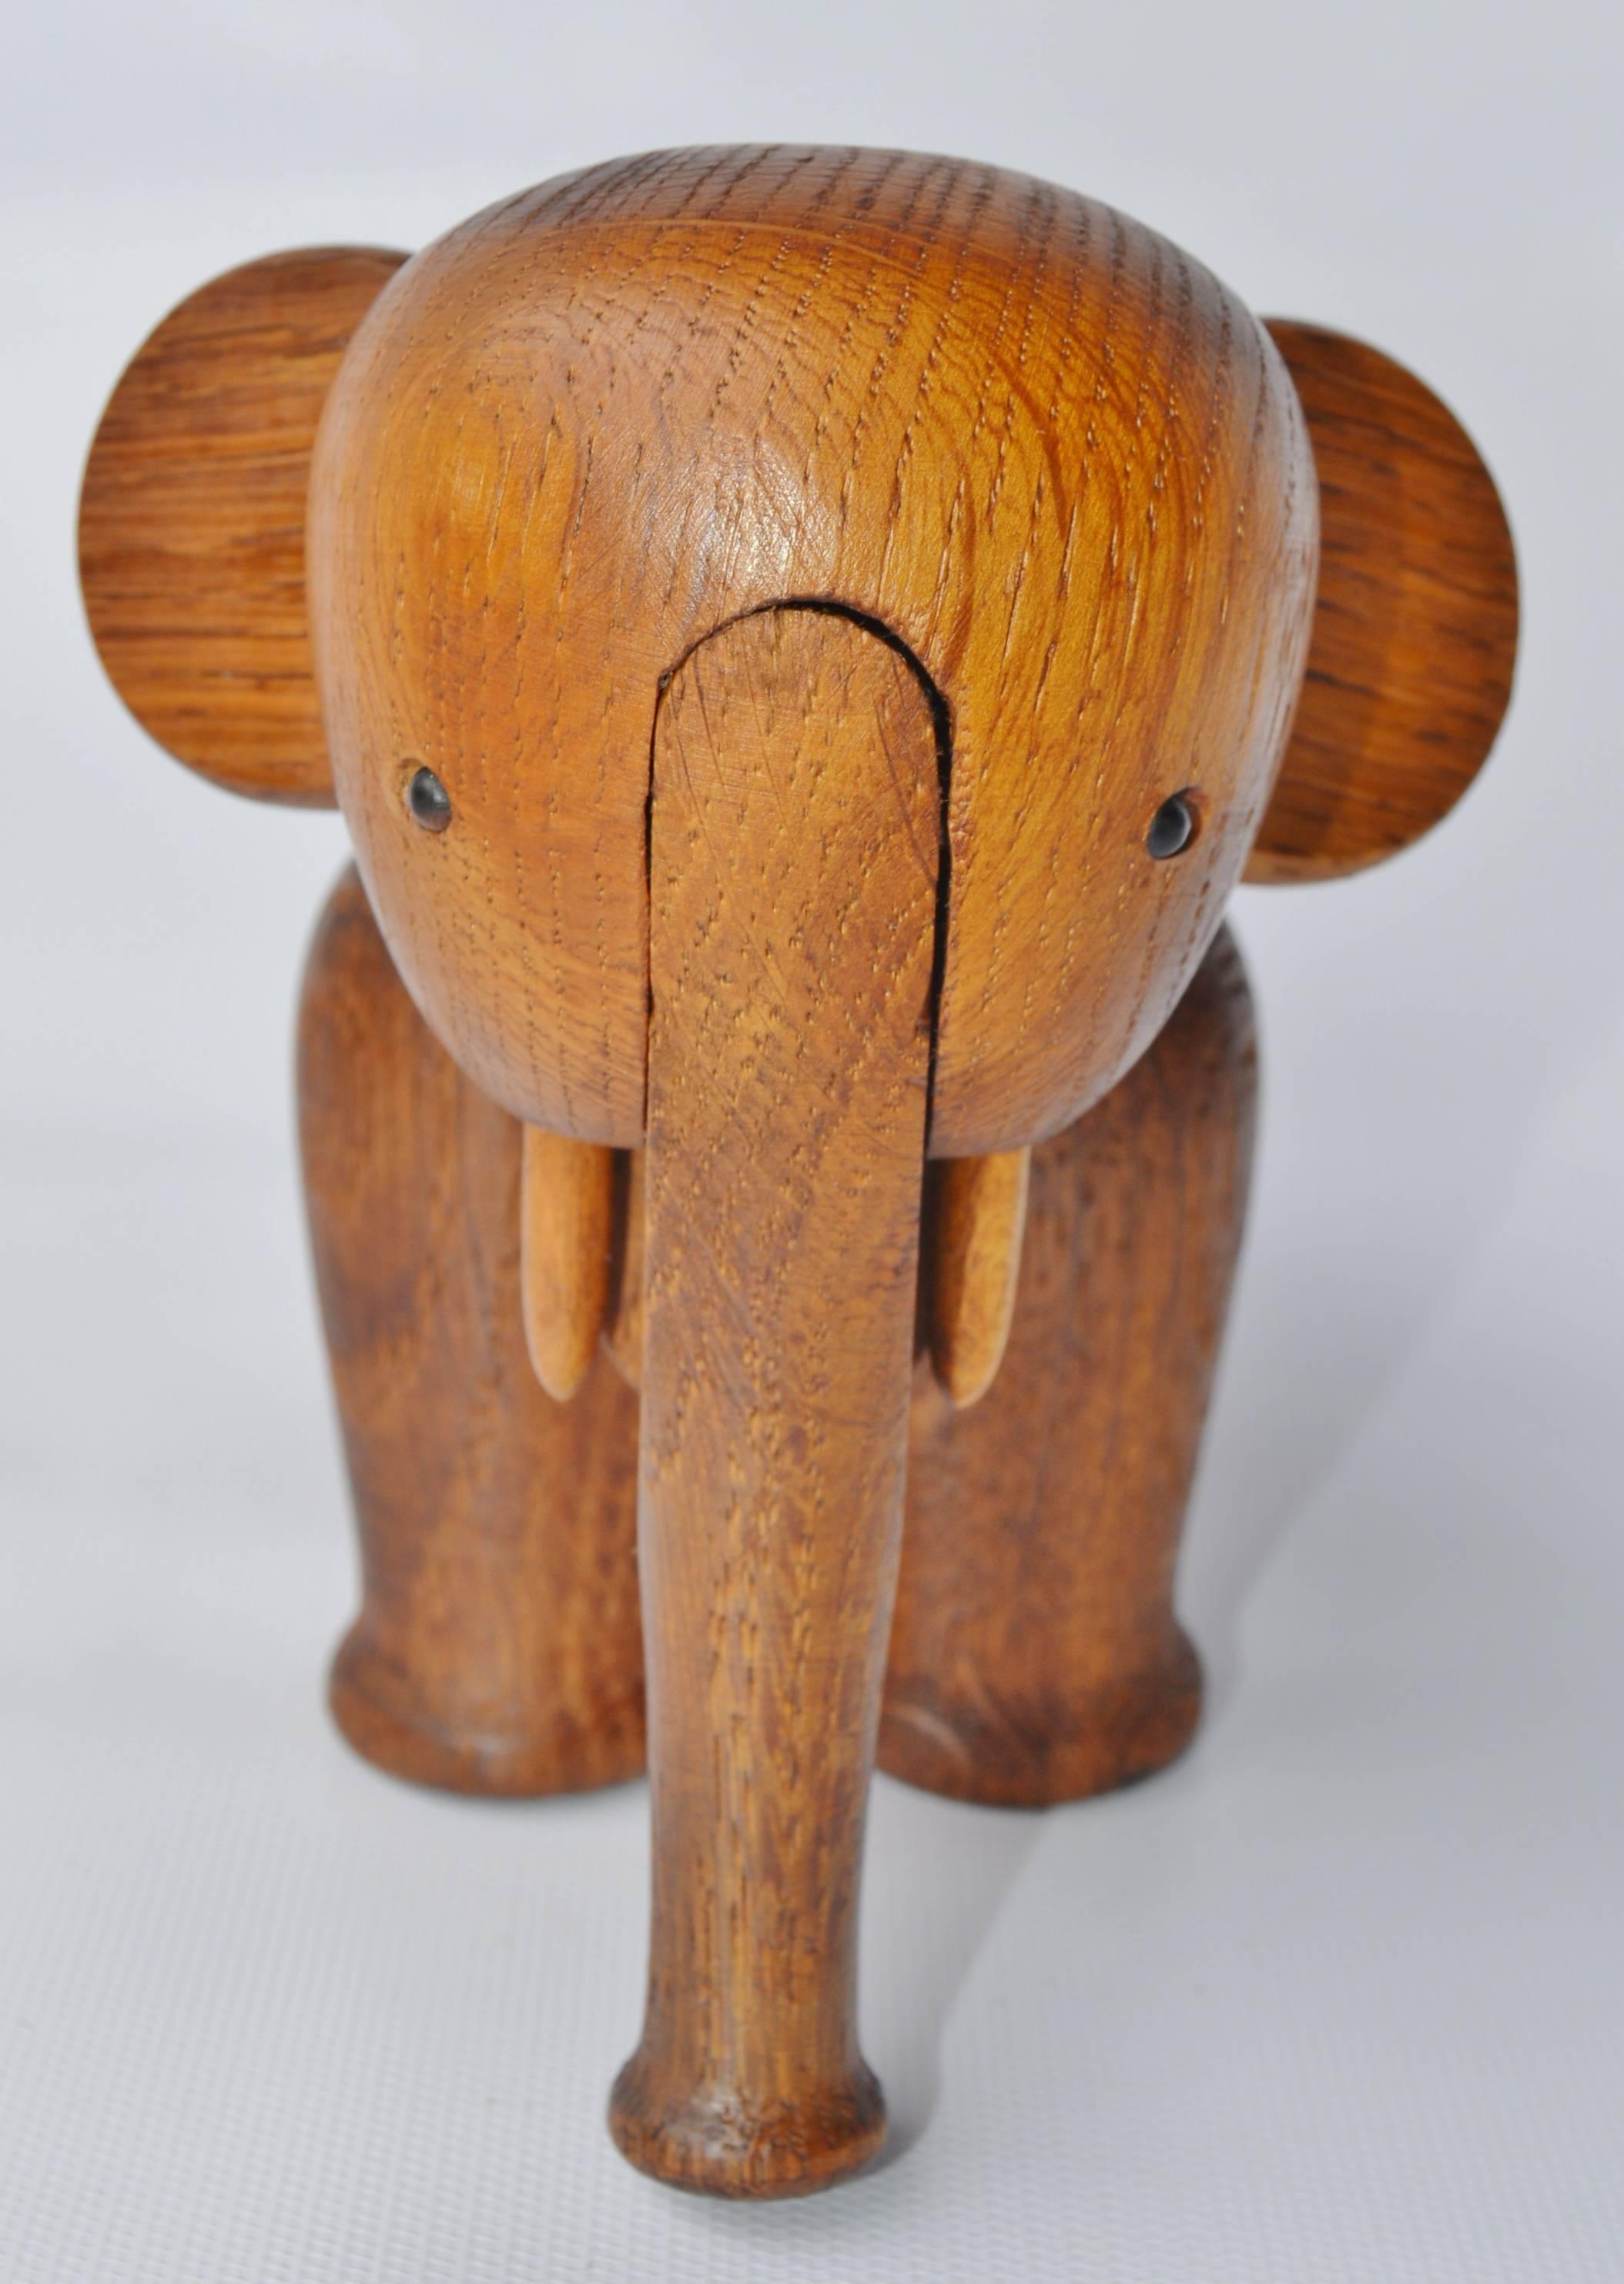 This delightful Danish modern 1950s solid oak elephant figure was designed by Kay Bojesen in the 1950s and features a moveable trunk, head and legs. The styling and sweet character of the figure is sure to please, freshly oiled and in excellent